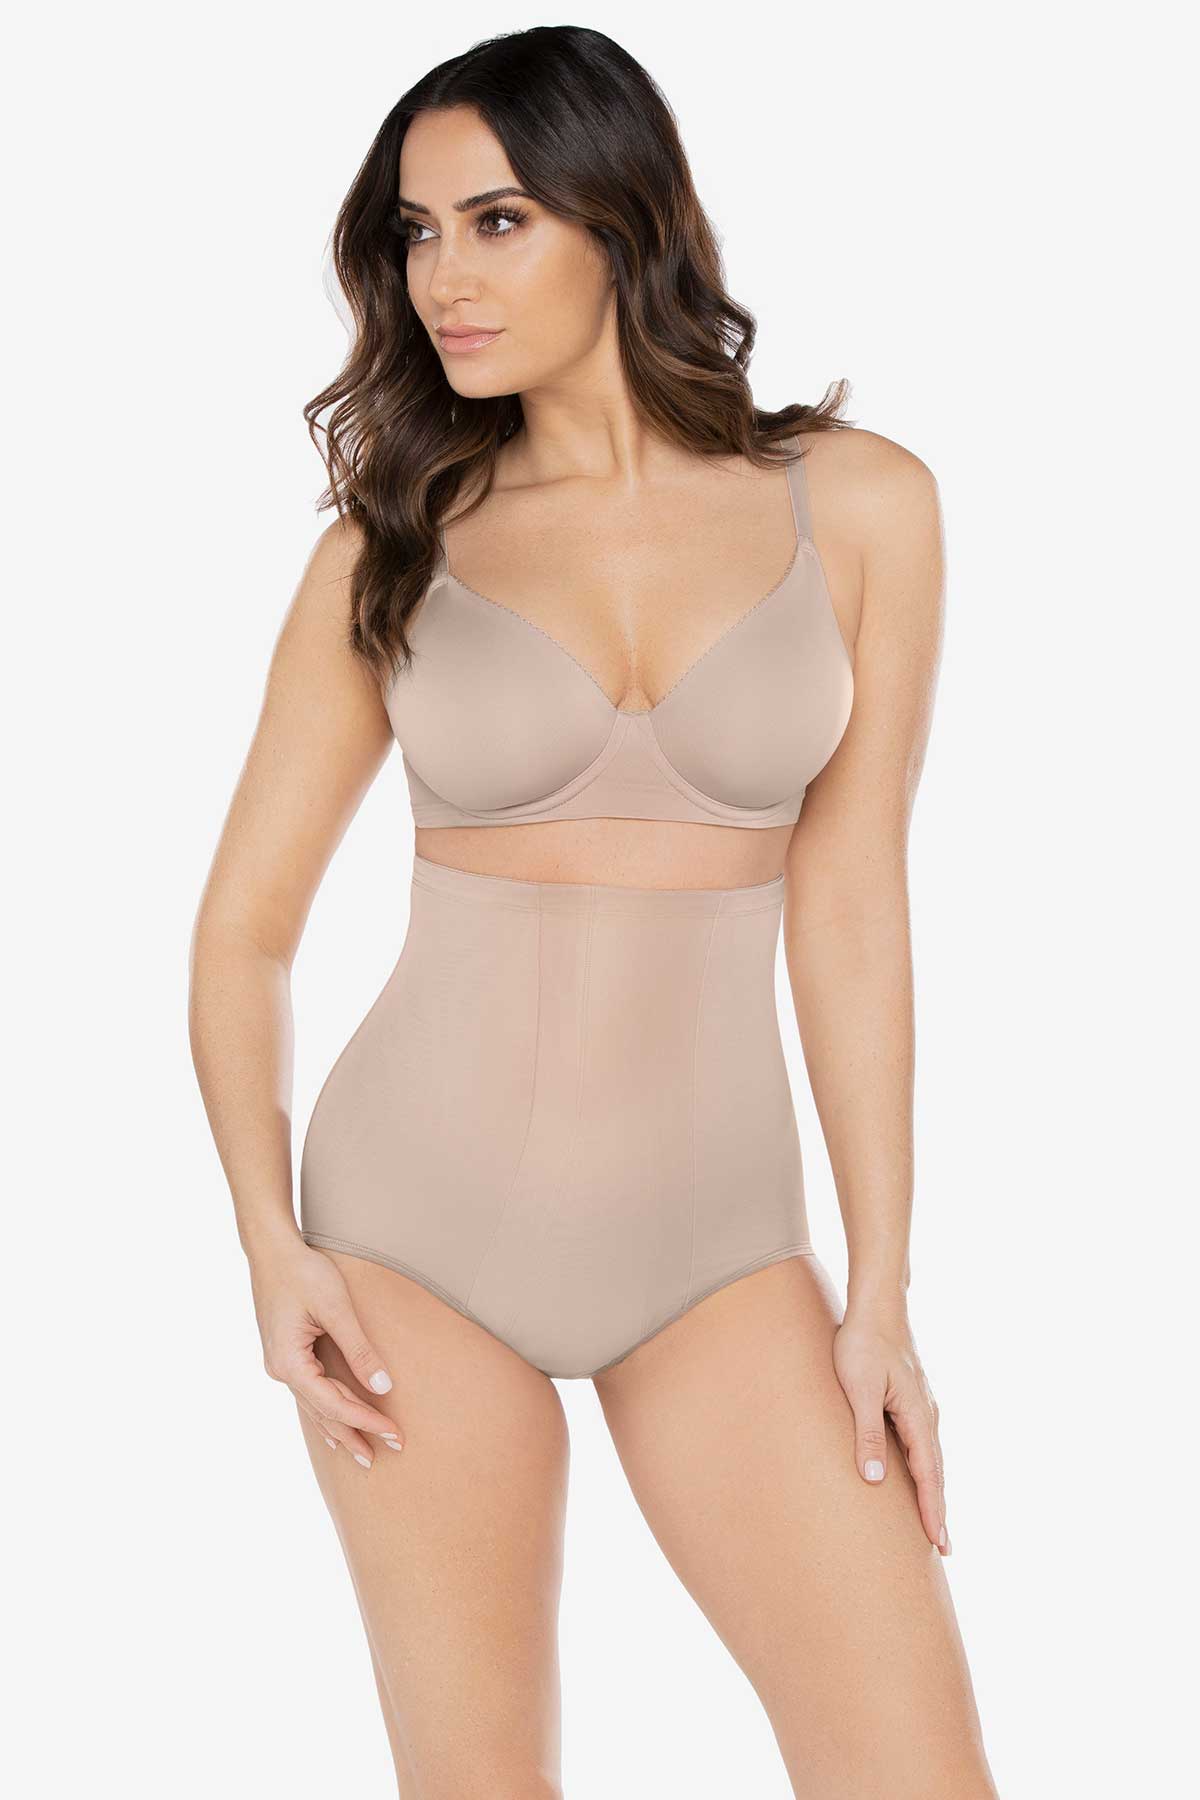 Up To 43% Off on Women High Waist Control Brie